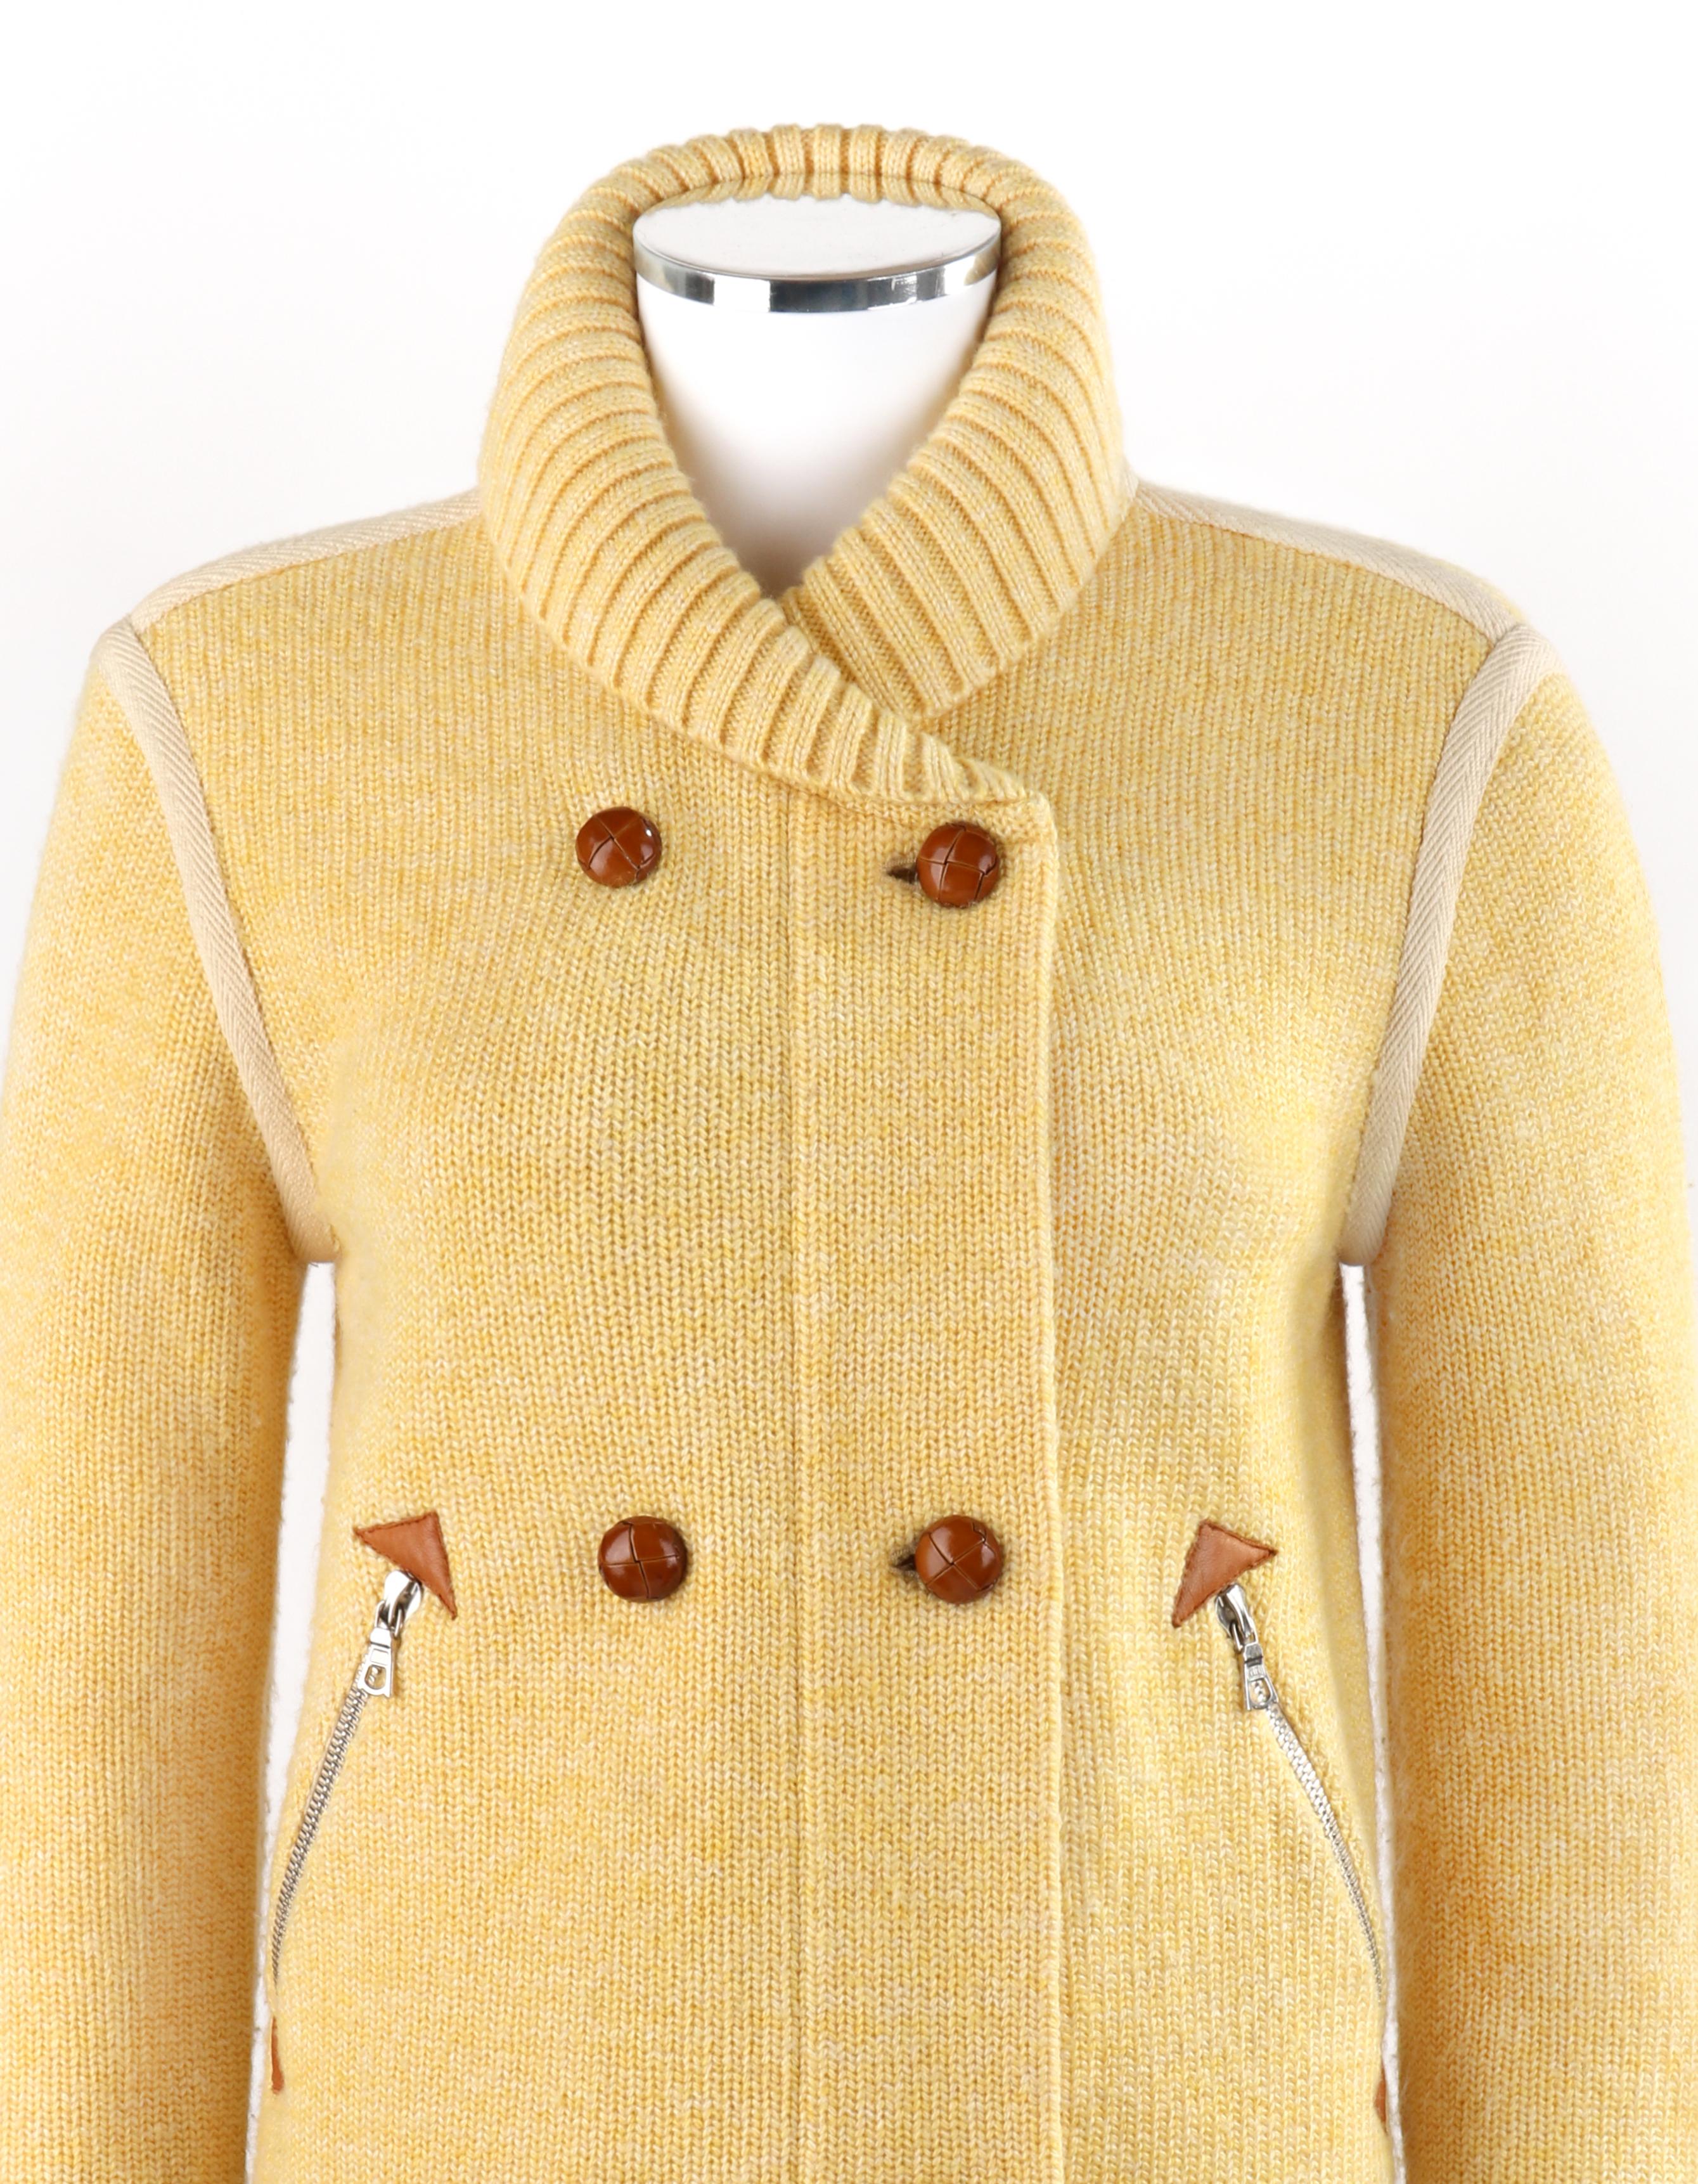 COURREGES c.1980’s Yellow Knit Double Breasted Leather Cardigan Sweater Jacket

Circa: 1980’s
Label(s): Courreges Paris 
Designer: Andre Courreges
Style: Double-breasted sweater jacket
Color(s): Shades of yellow, off white, tan, and brown
Lined: